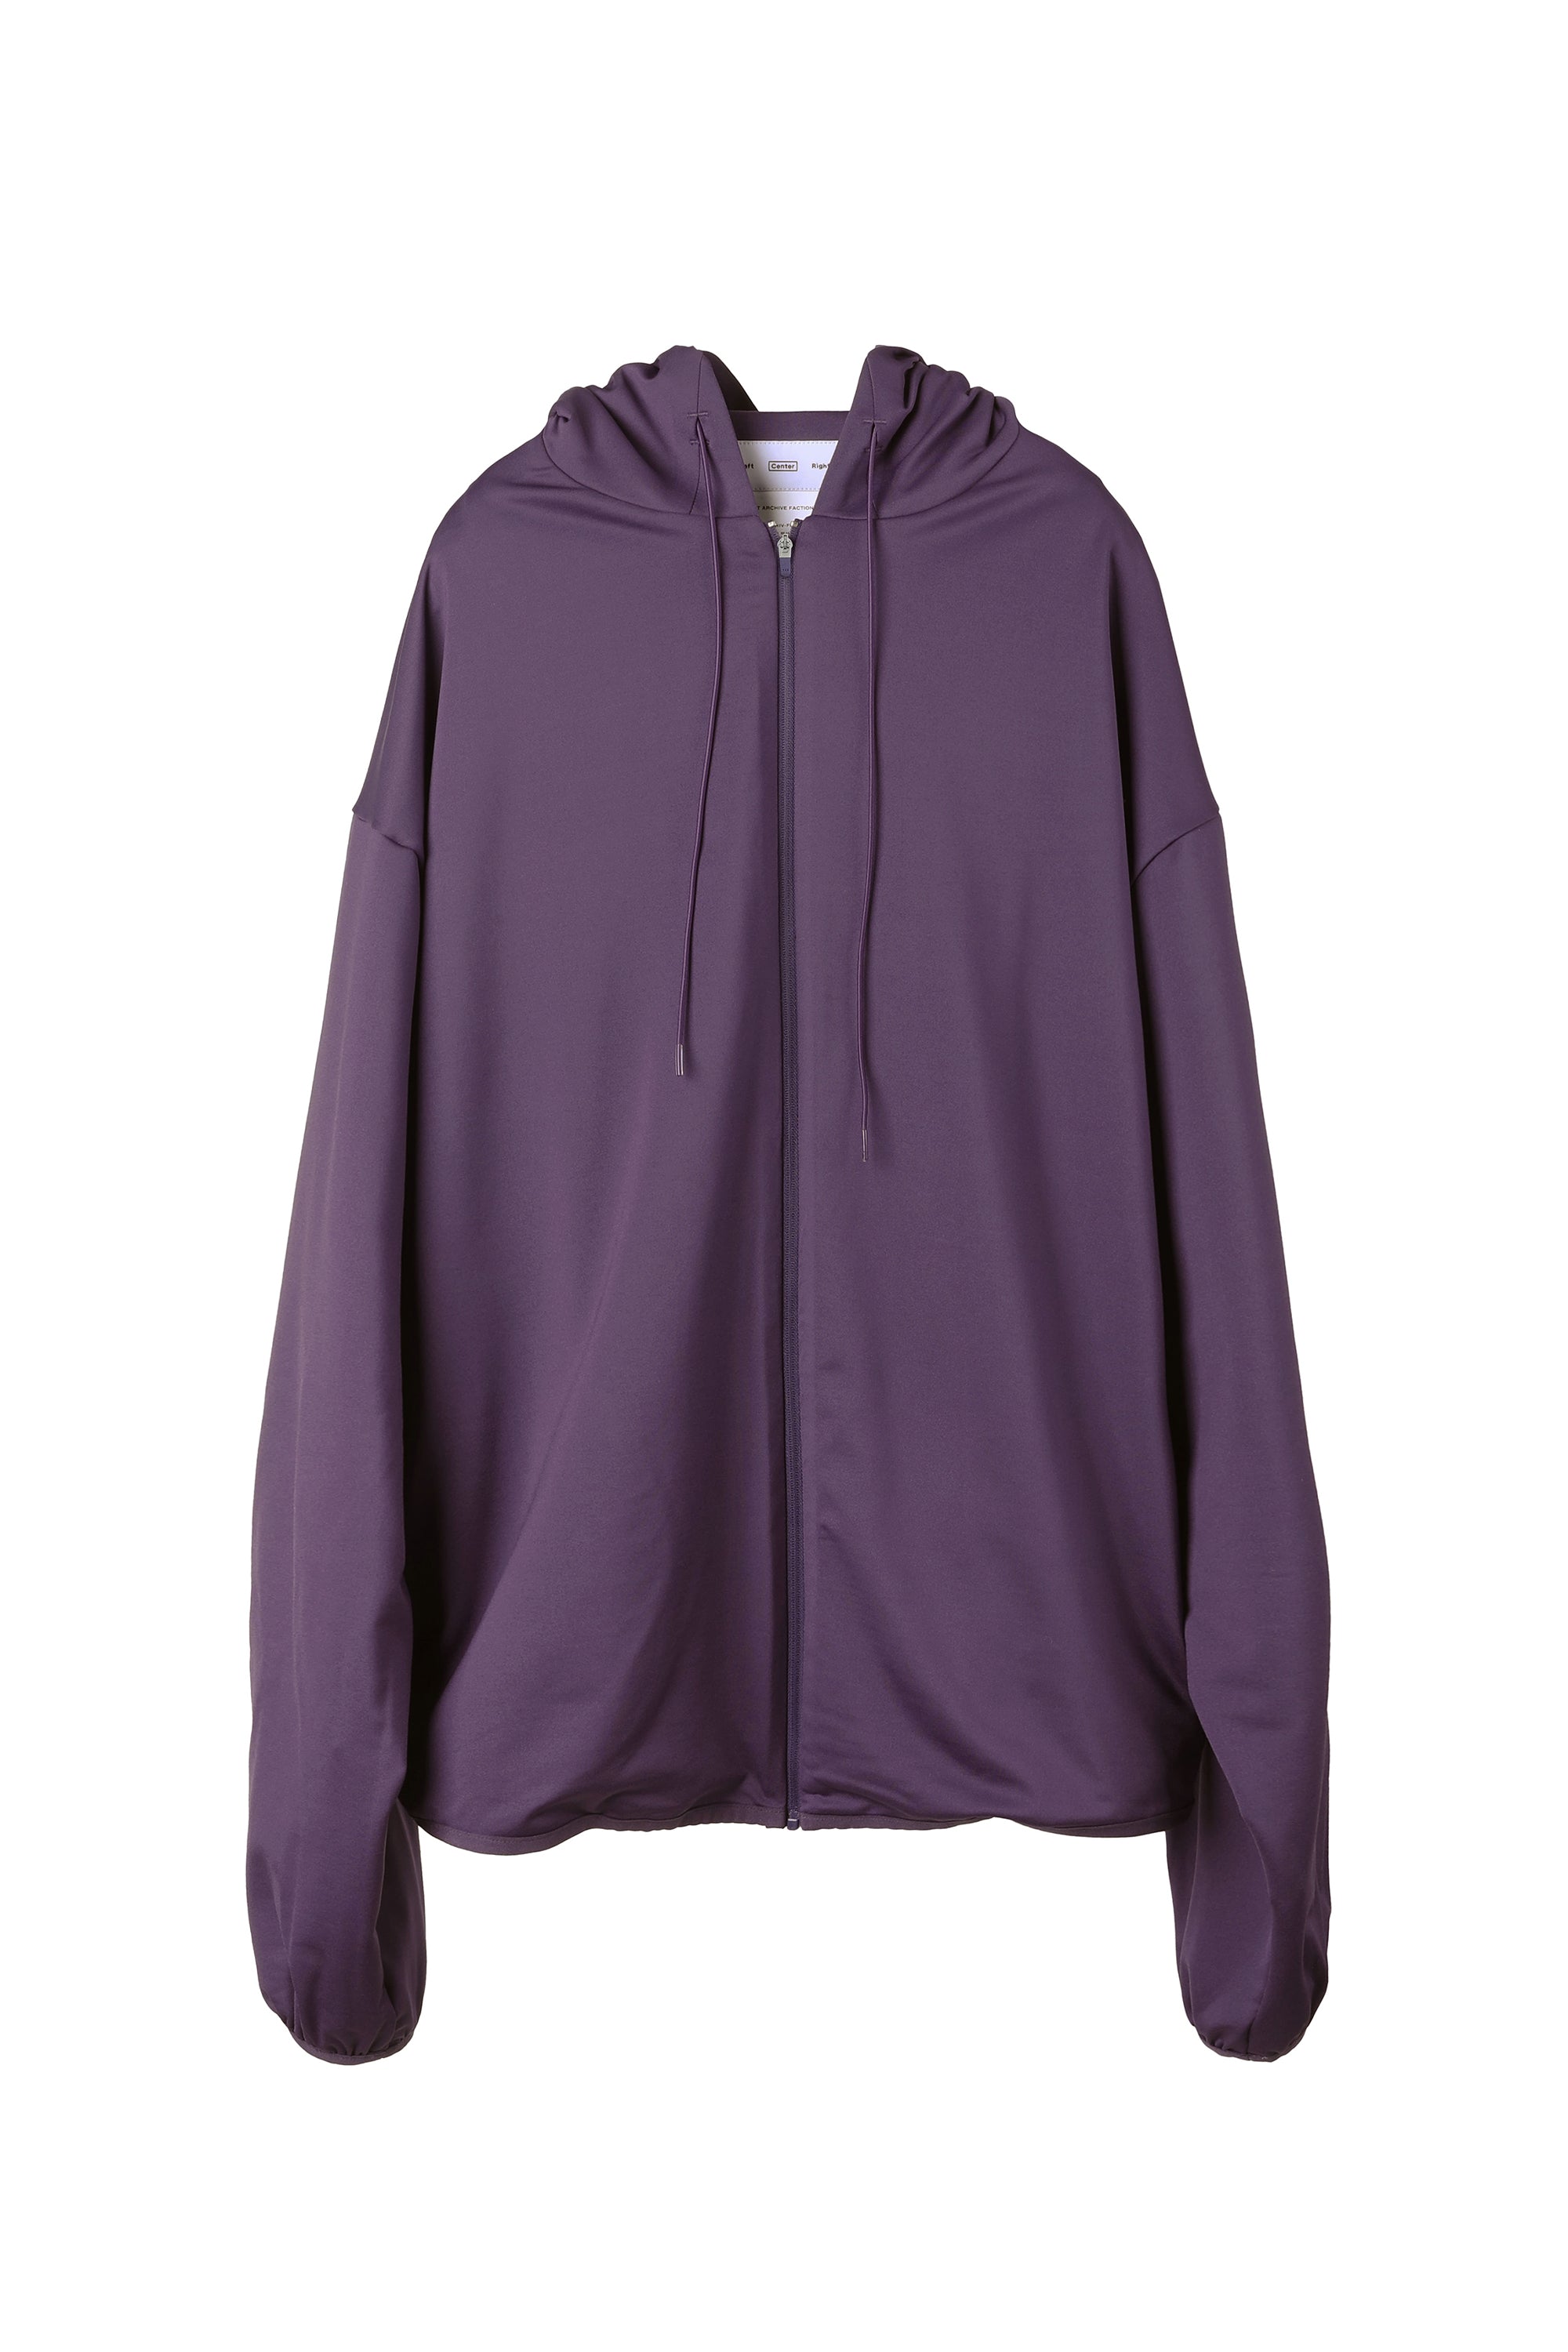 POST ARCHIVE FACTION FW22 5.0 HOODIE CENTER / PRL - NUBIAN